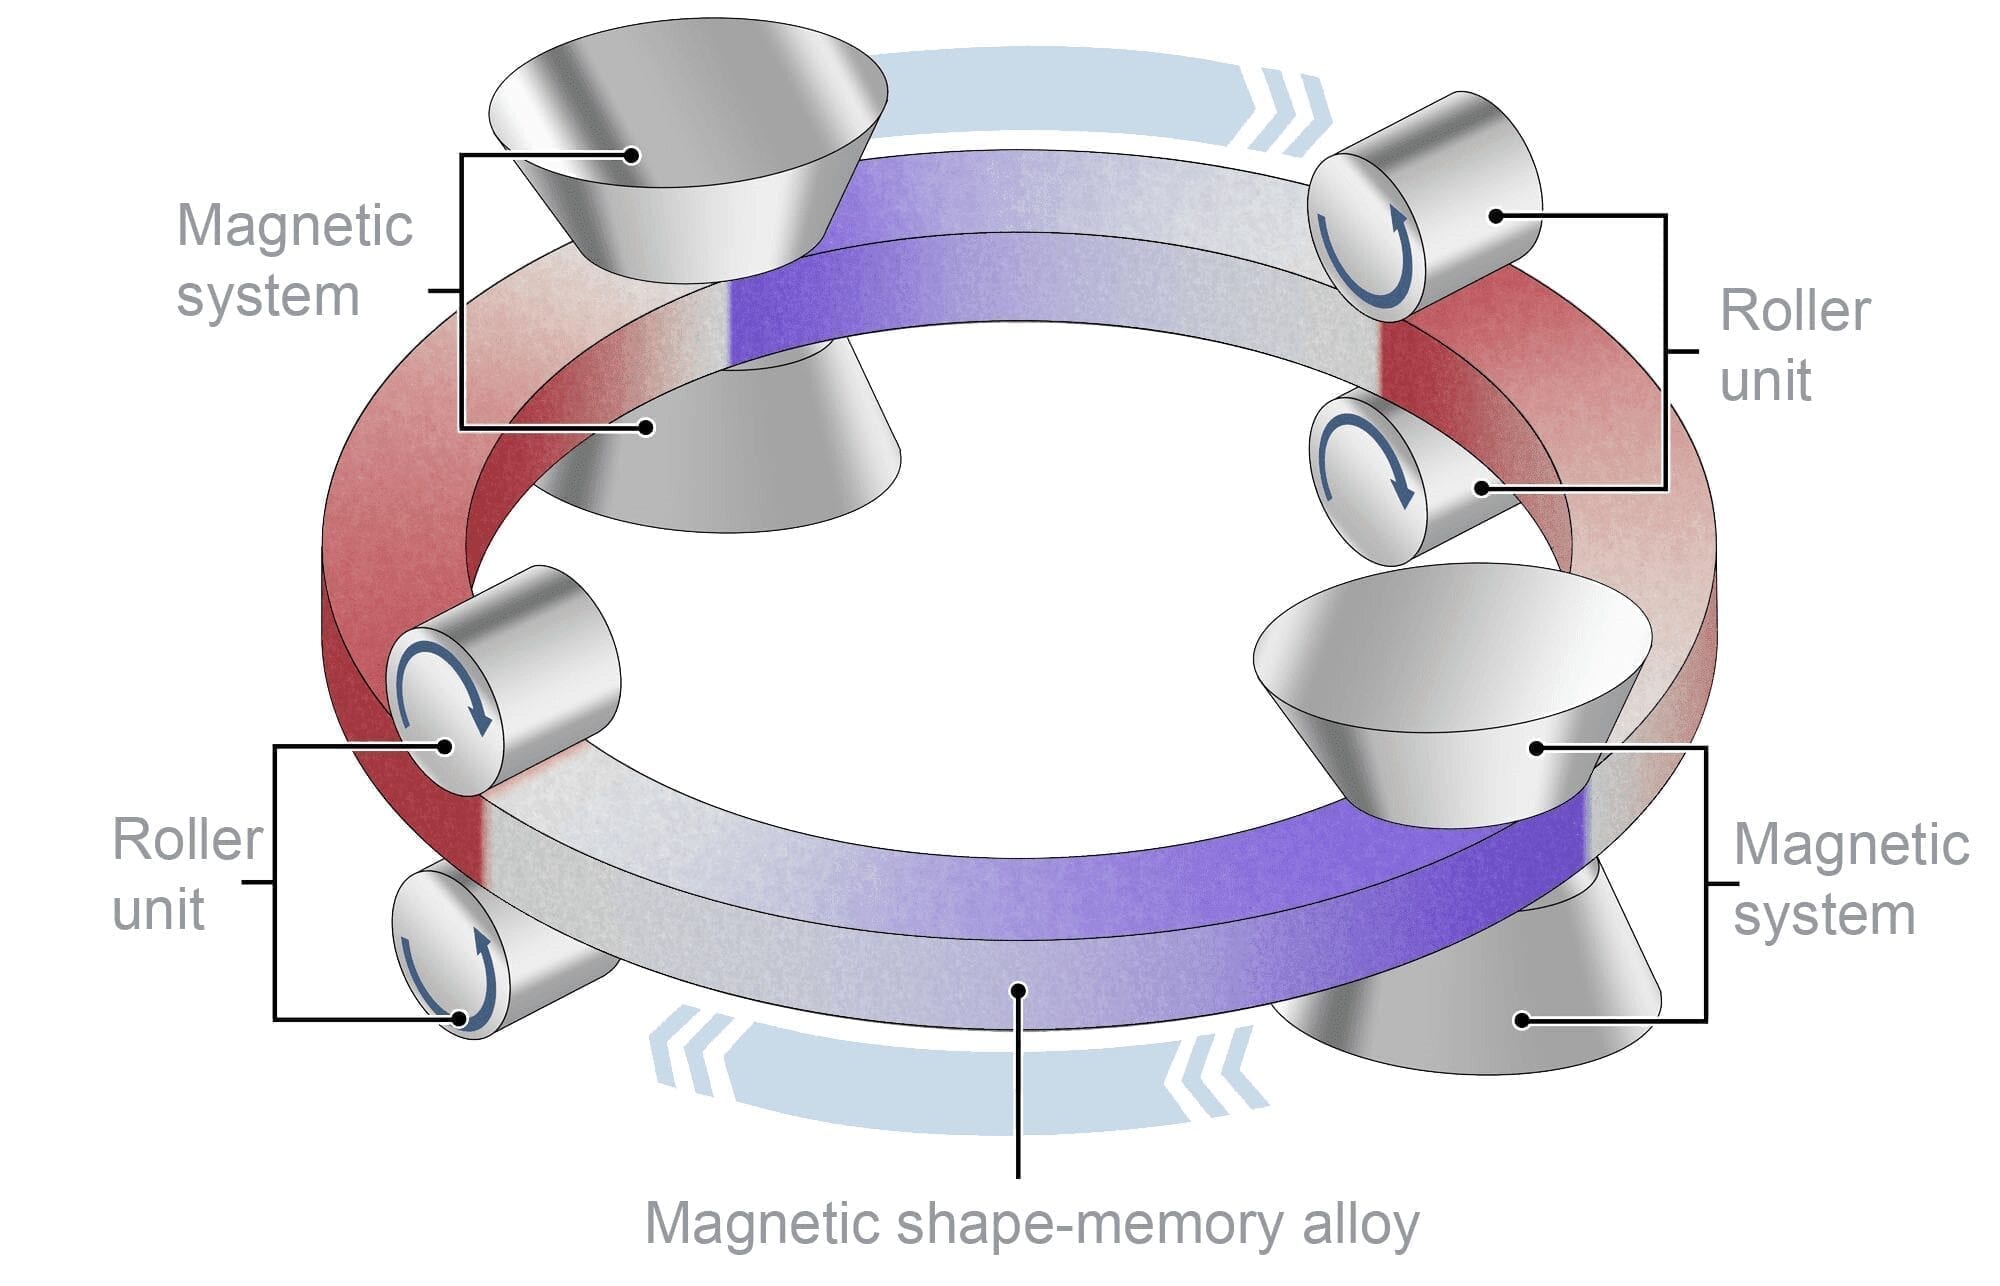 Could magnetic refrigeration using magnetic materials in magnetic fields meet global cooling needs?